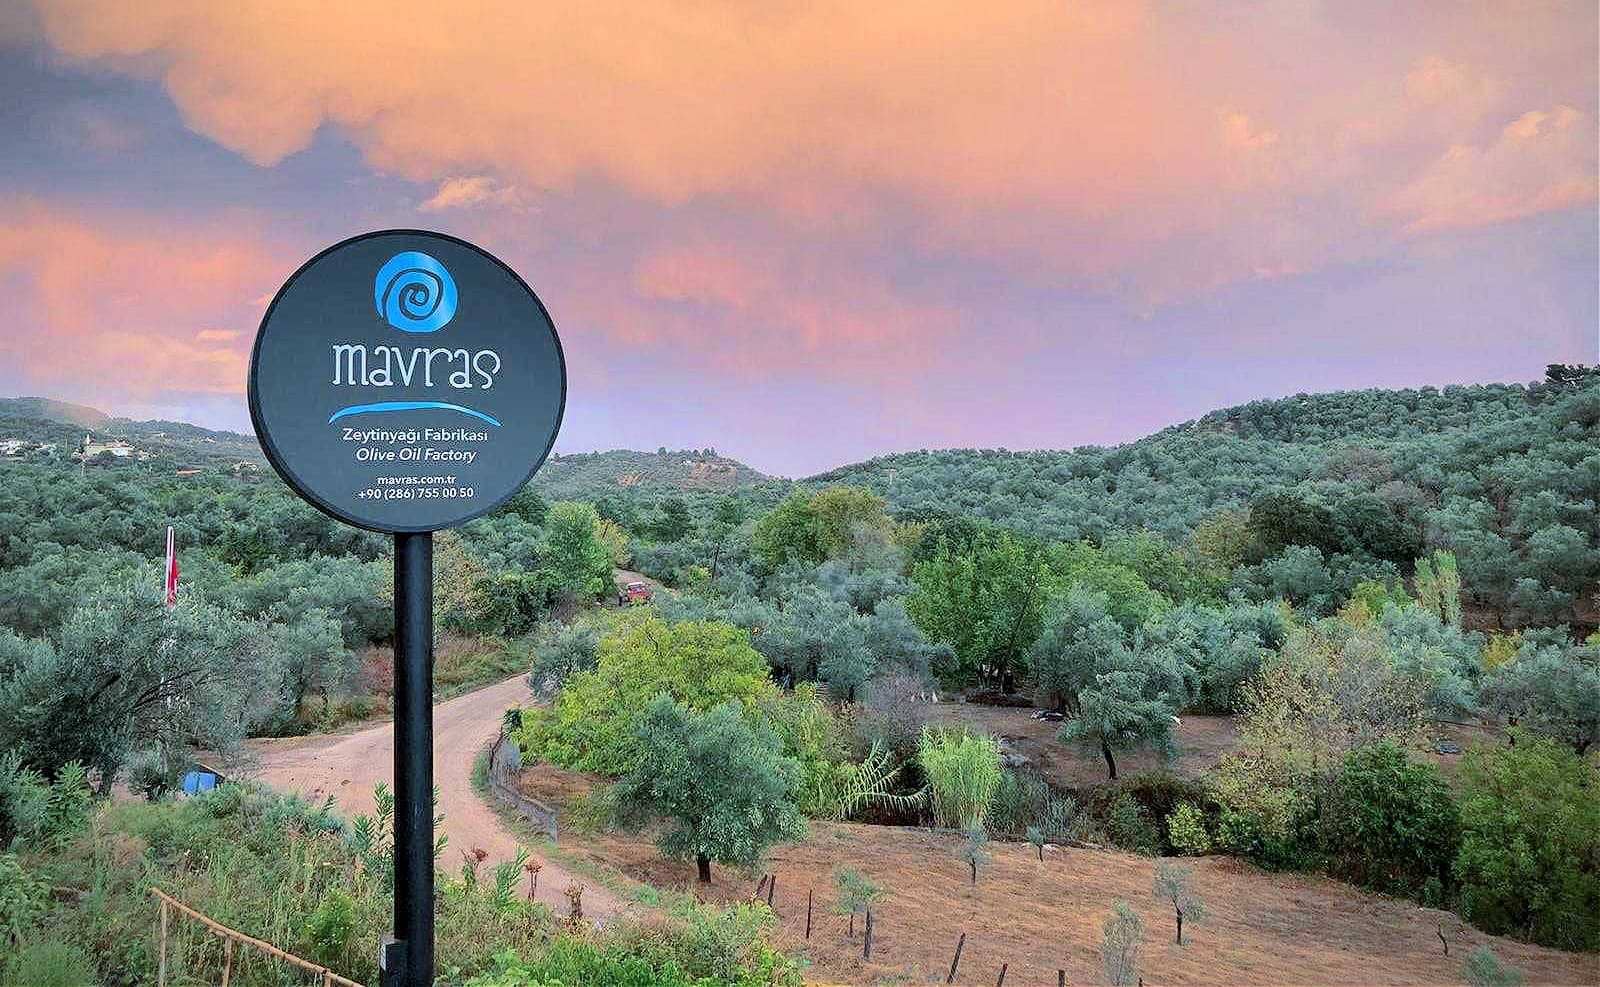 africa-middle-east-profiles-production-mavras-olive-oil-company-relies-on-tradition-terroir-to-produce-quality-evoo-olive-oil-times